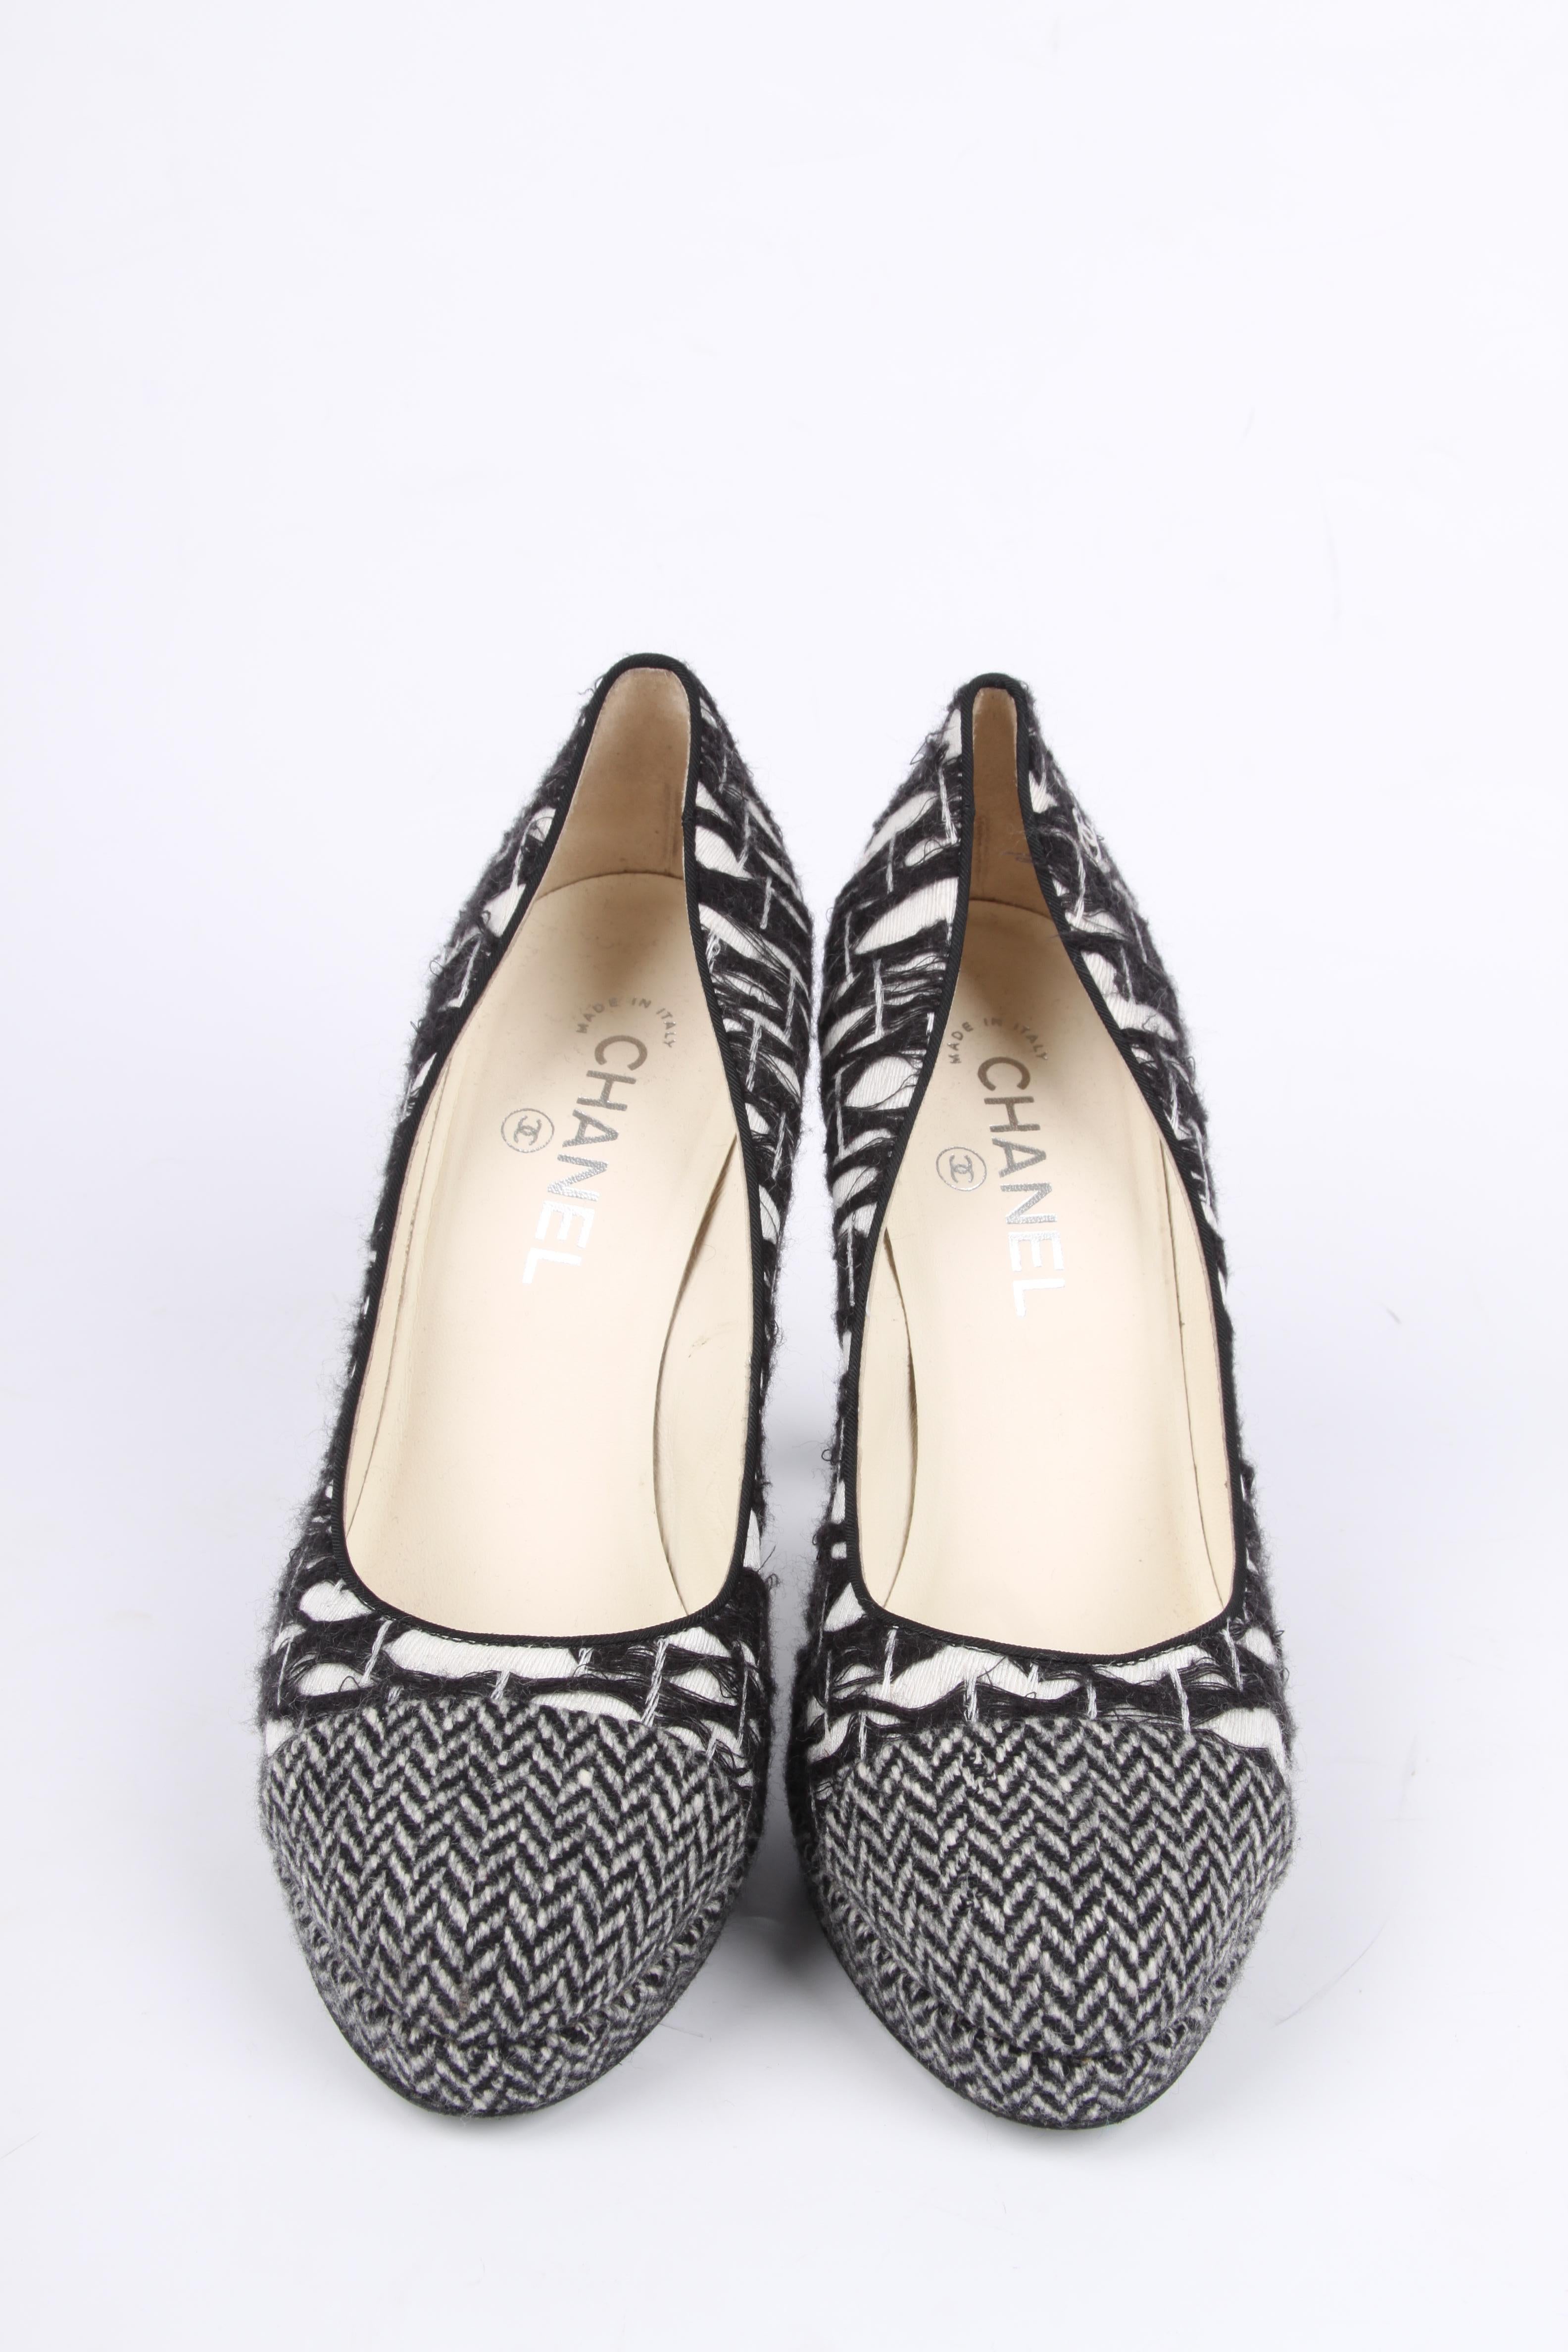 Soooo beautiful! Pair of heels by Chanel in black and white tweed.

A round toe, the heel with silver-tone detailing is 11,5 centimeters high and the platform is almost 2 centimeters high. Fully lined with off-white leather, a silver-tone Chanel